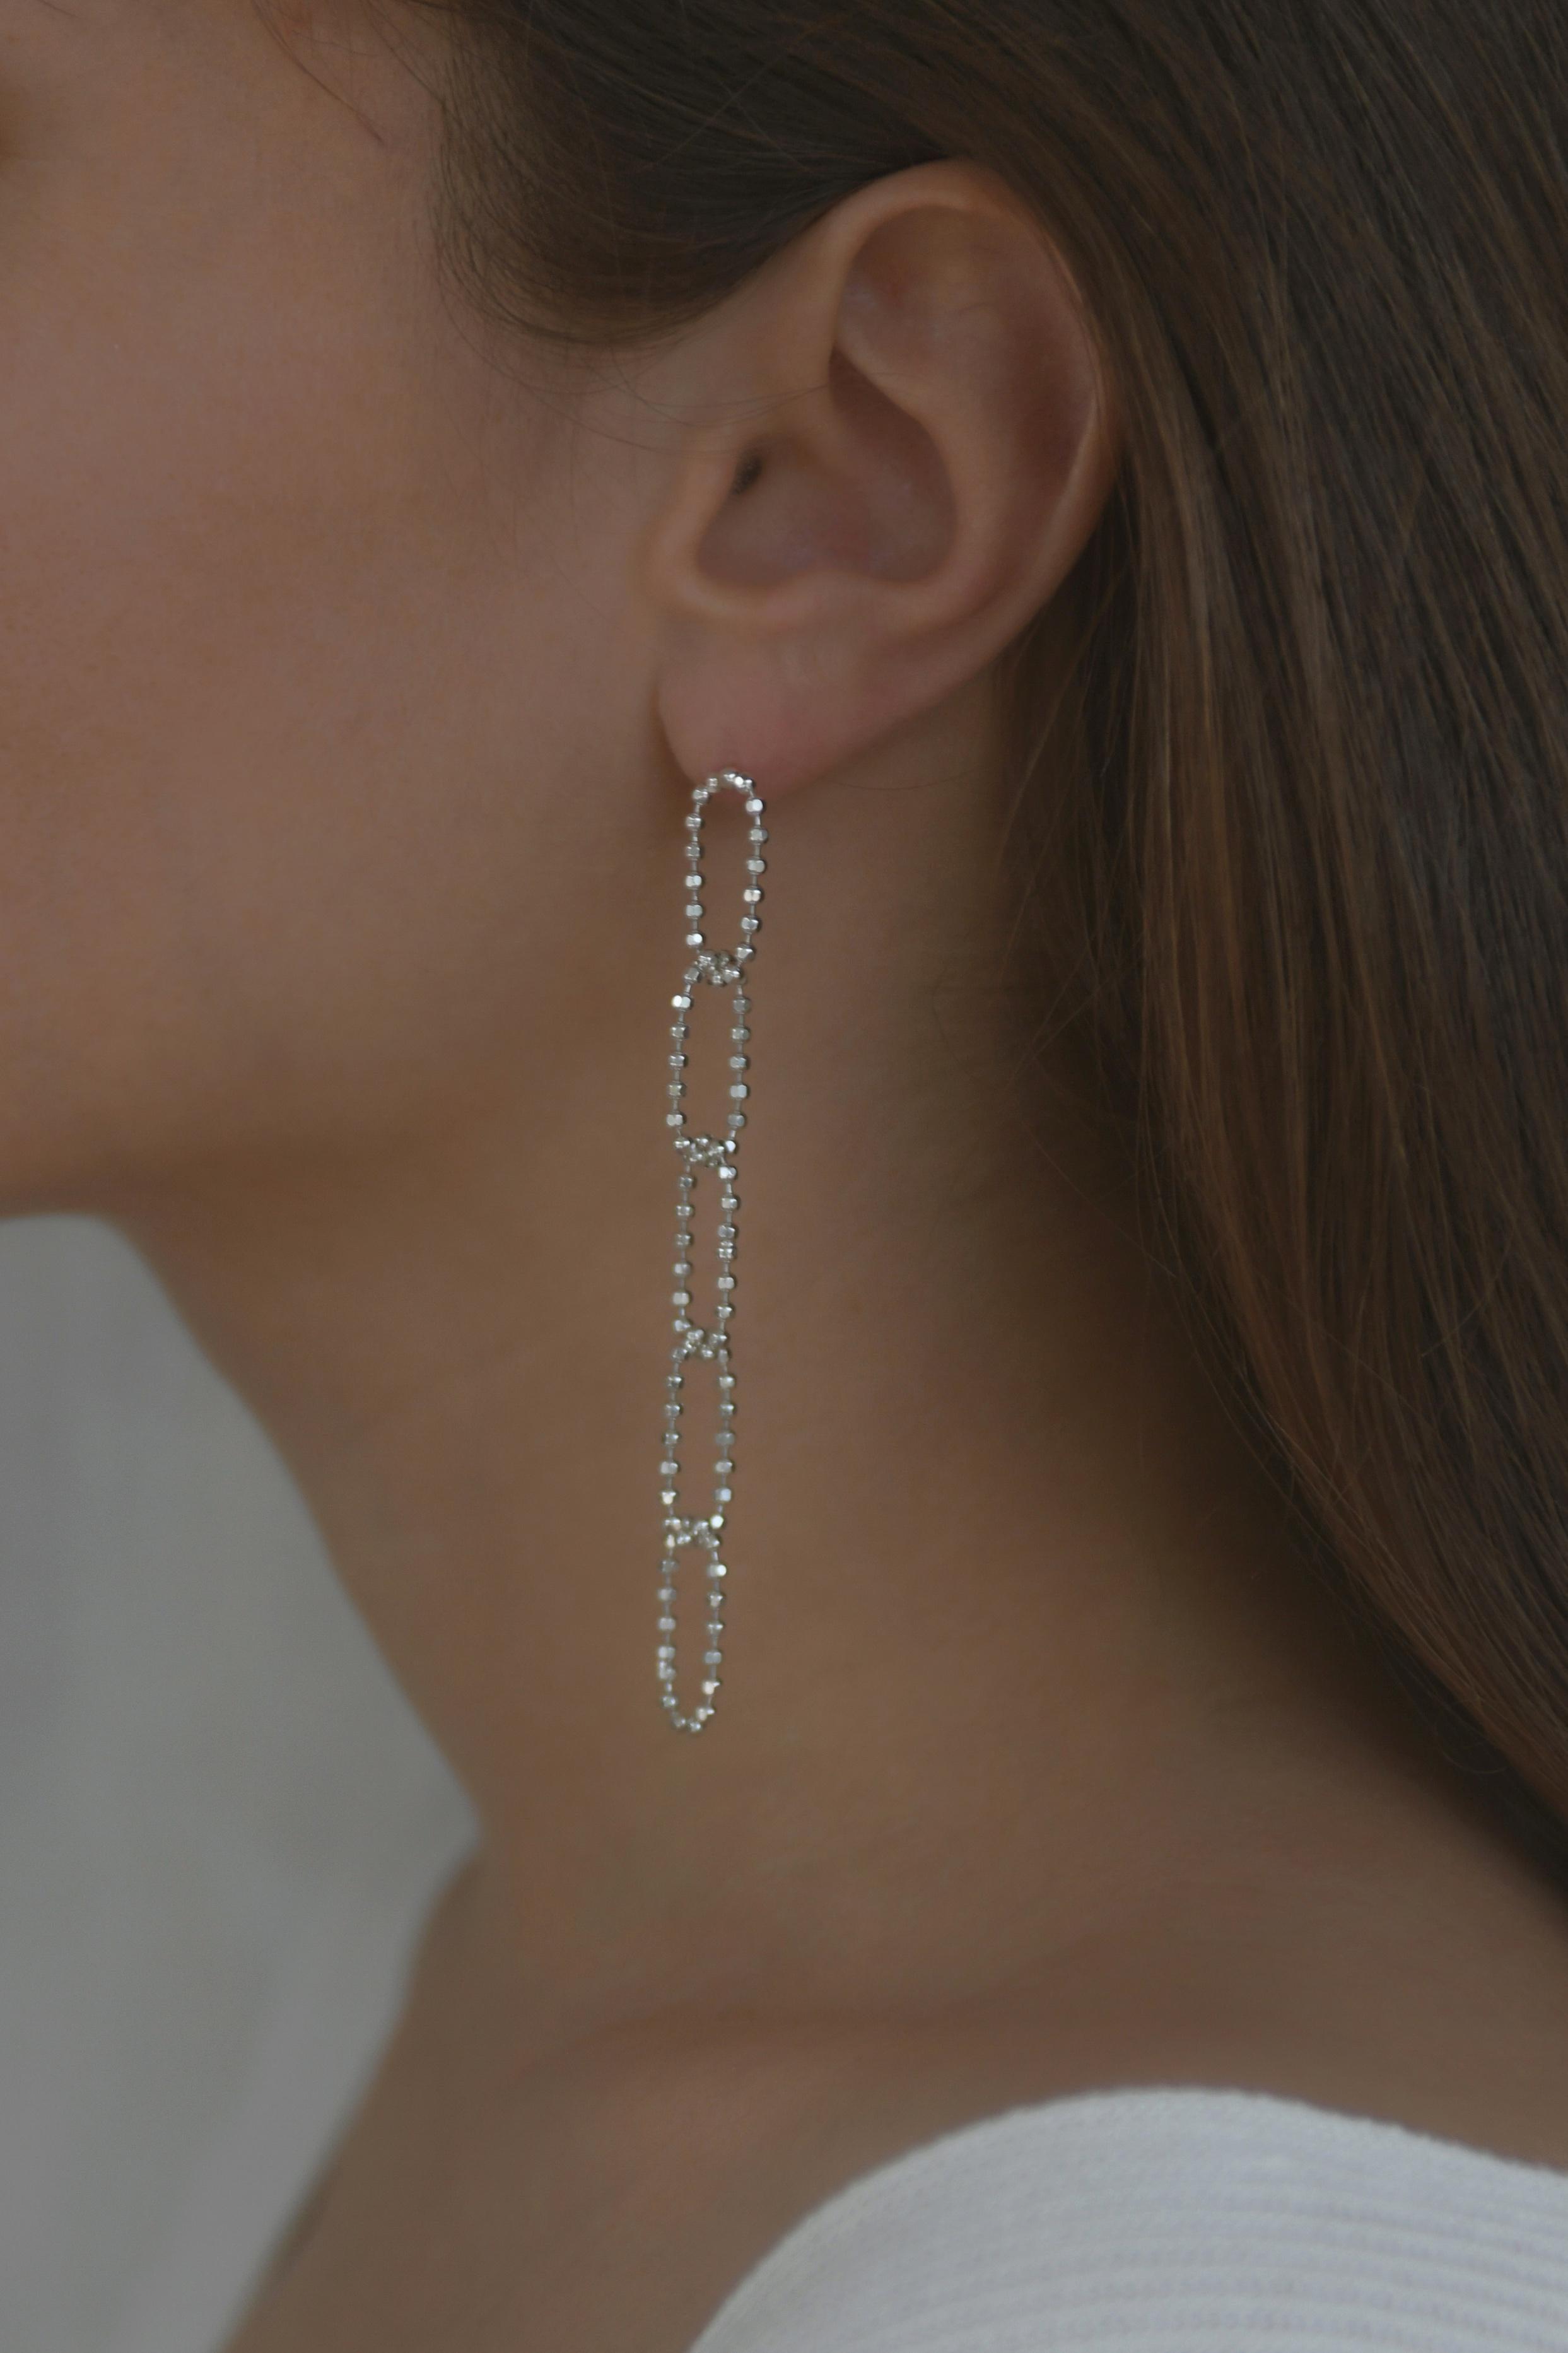 Honeycomb long earrings 

Lightweight link earrings made of a delicate sterling silver beaded chain. The chain adds movement to the look and reflects light to make your face glow up. 

All of our earrings have 10 K posts to avoid allergies and